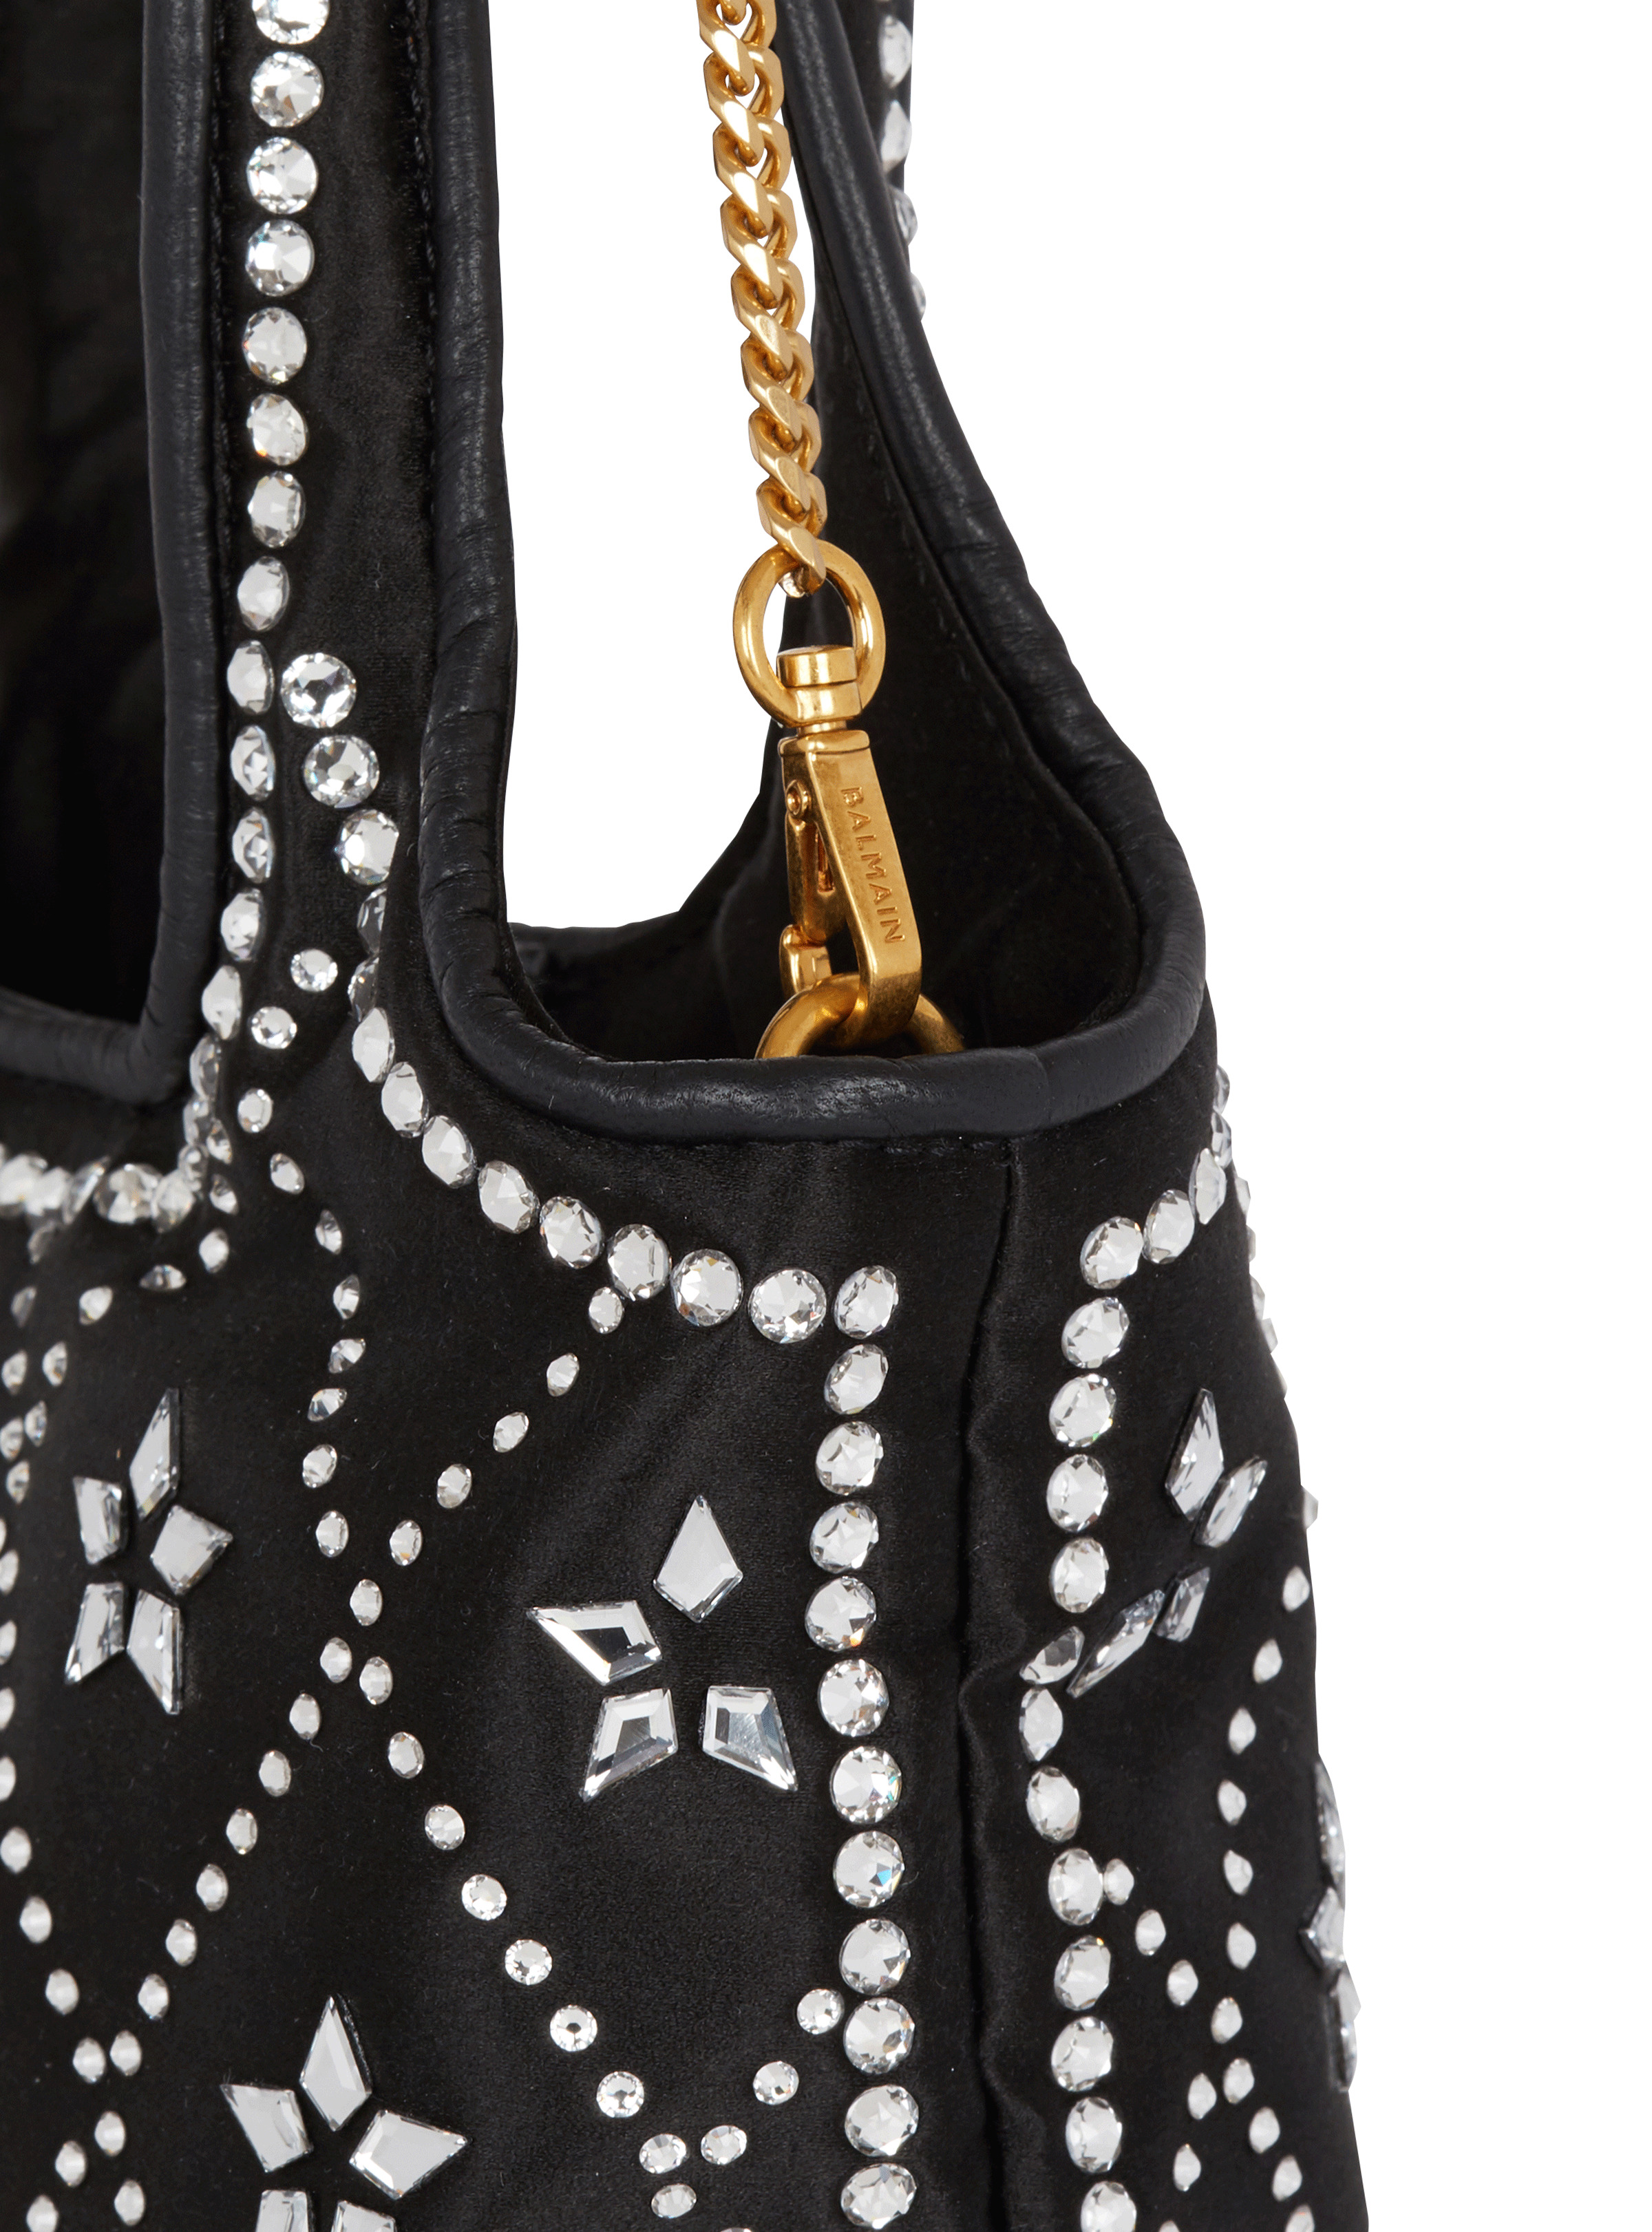 B-Army Grocery Bag in satin and crystals - 5